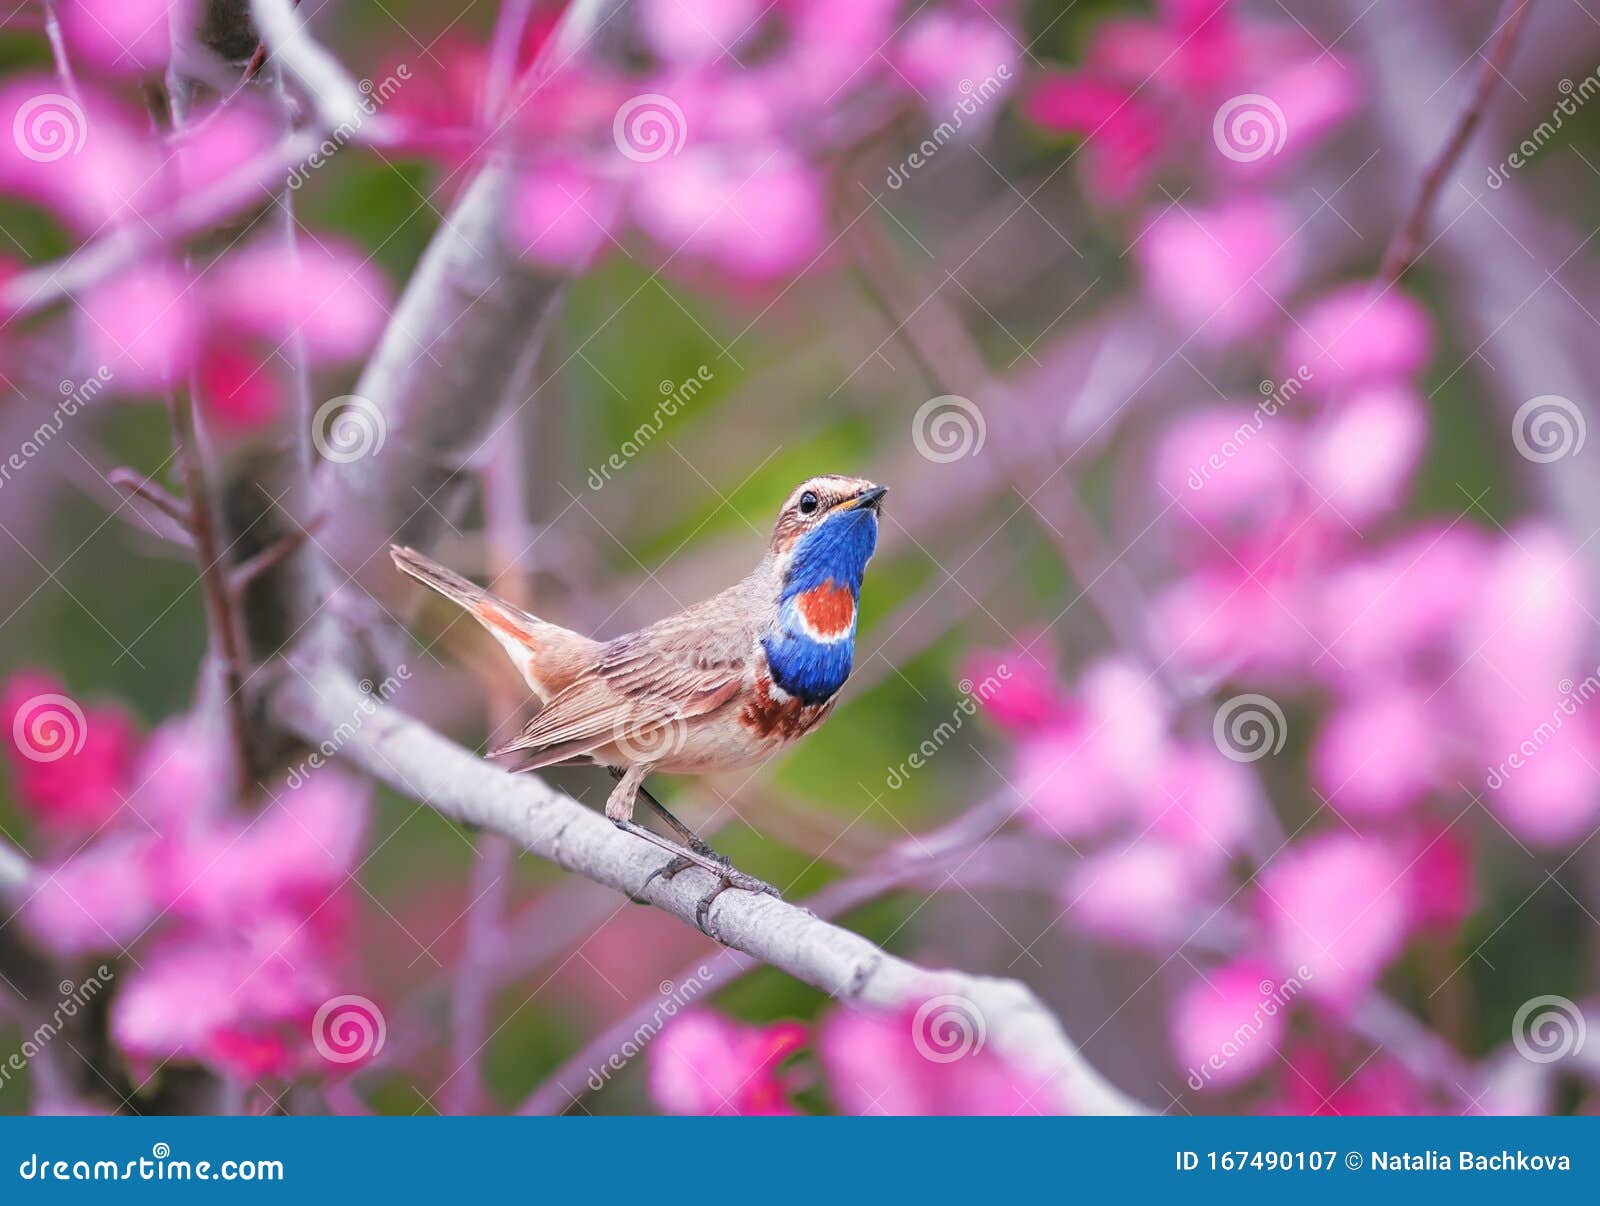 Songbird Male Warbler Sits on the Branches of a Shrub with Pink Flowers ...